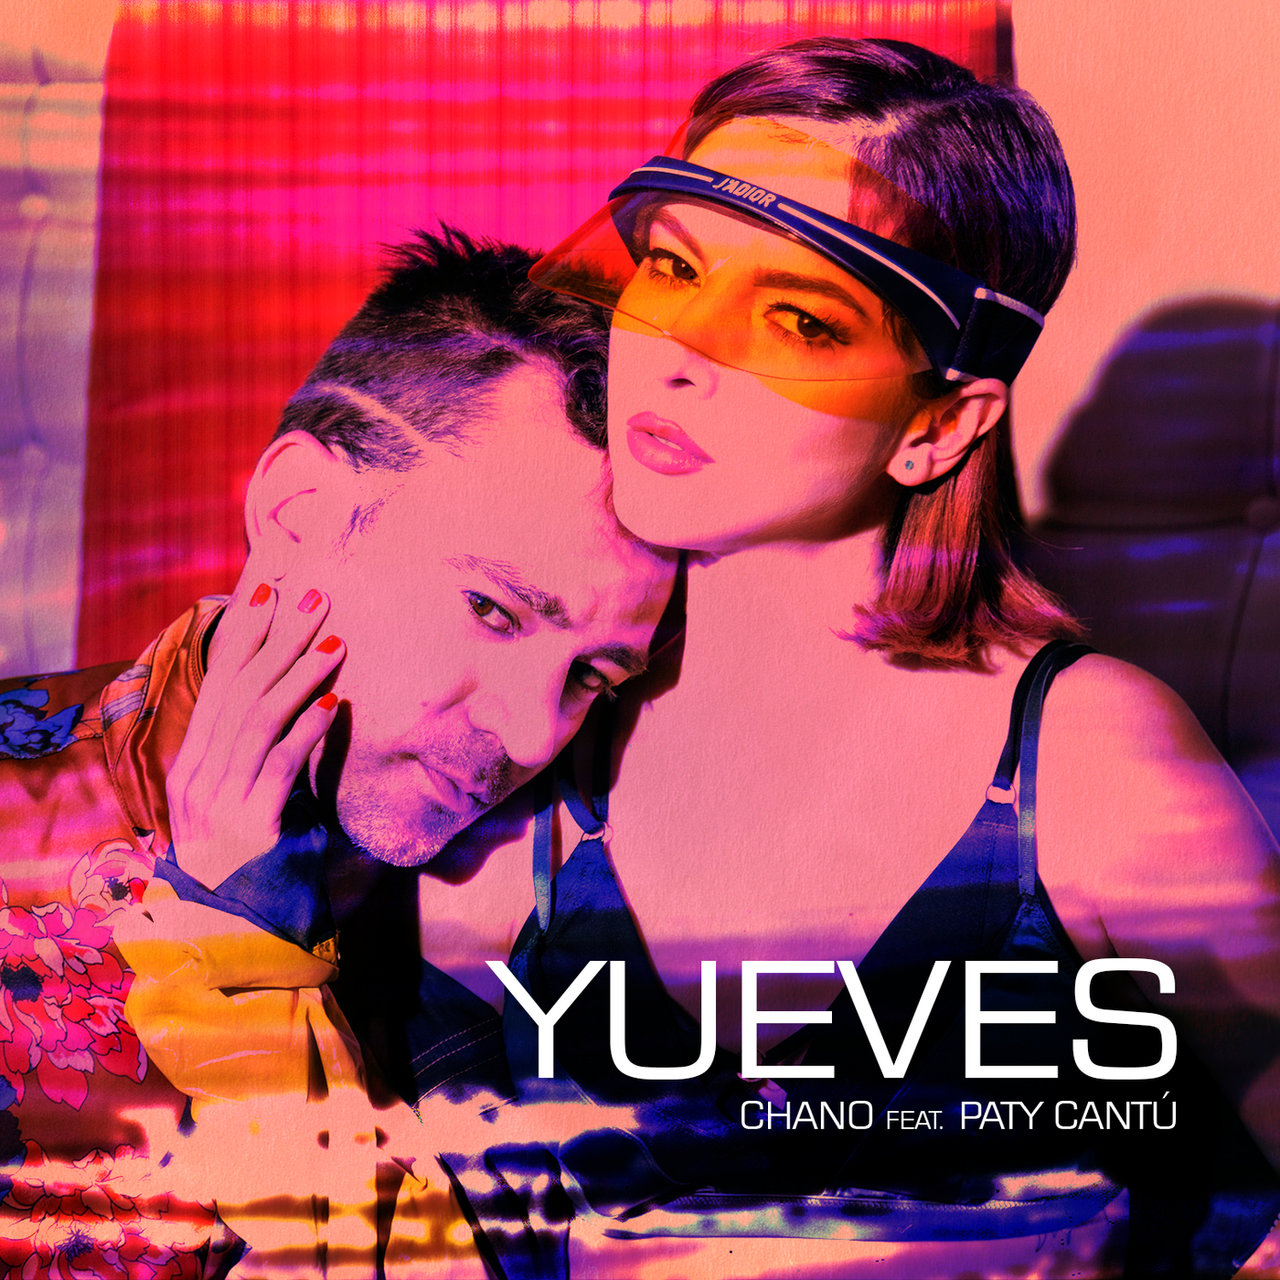 Chano ft. featuring Paty Cantú Yueves cover artwork